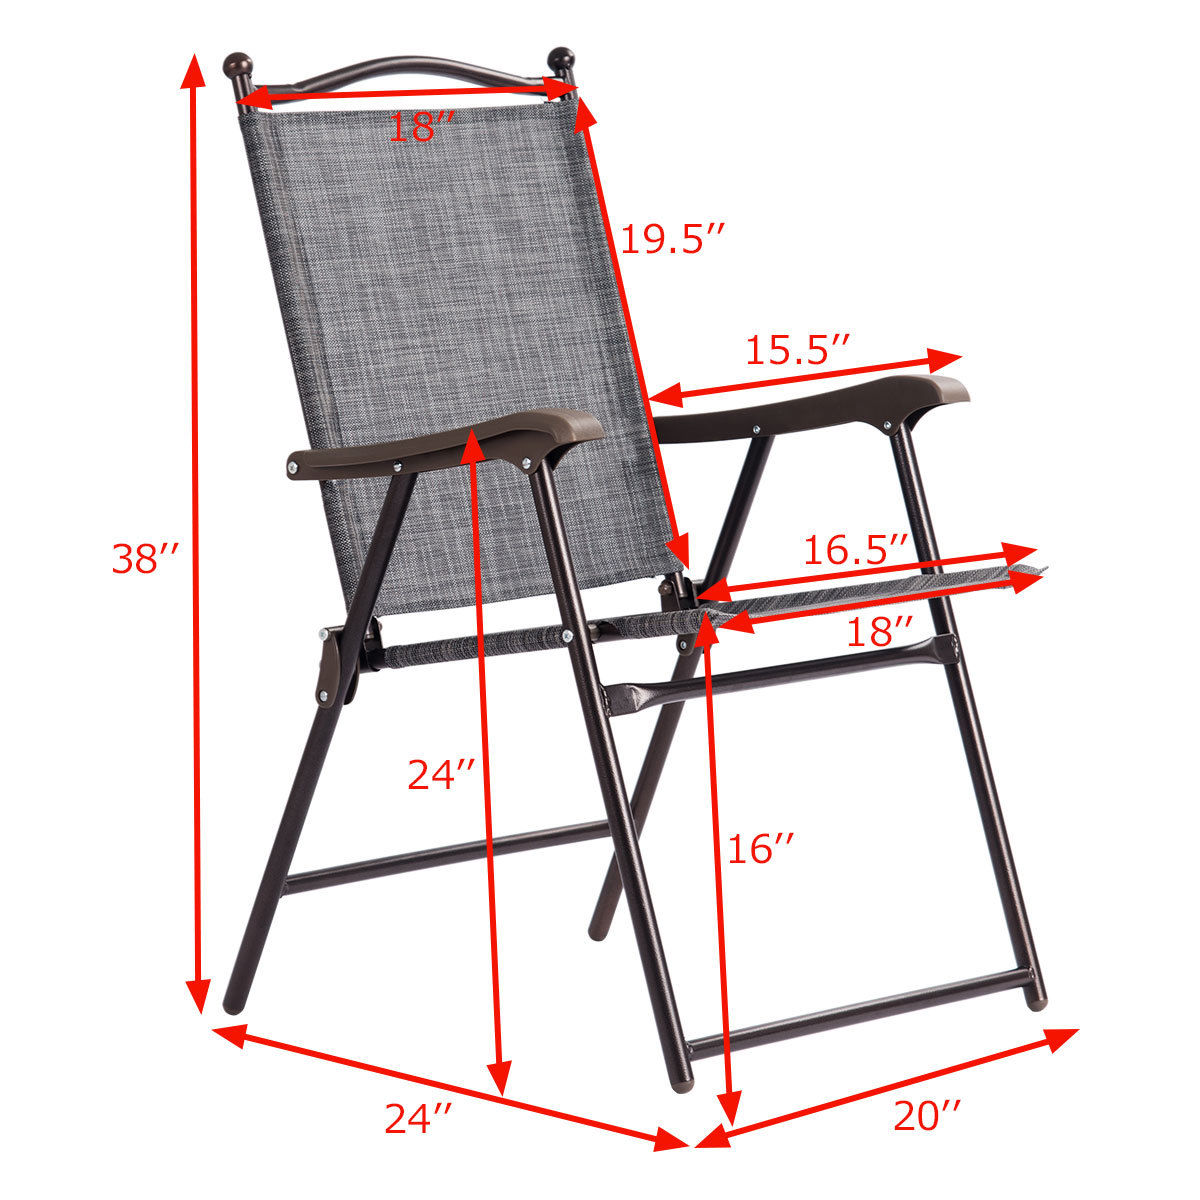 Costway Set of 2 Patio Folding Sling Back Chairs Camping Deck Garden Beach Gray - image 2 of 9